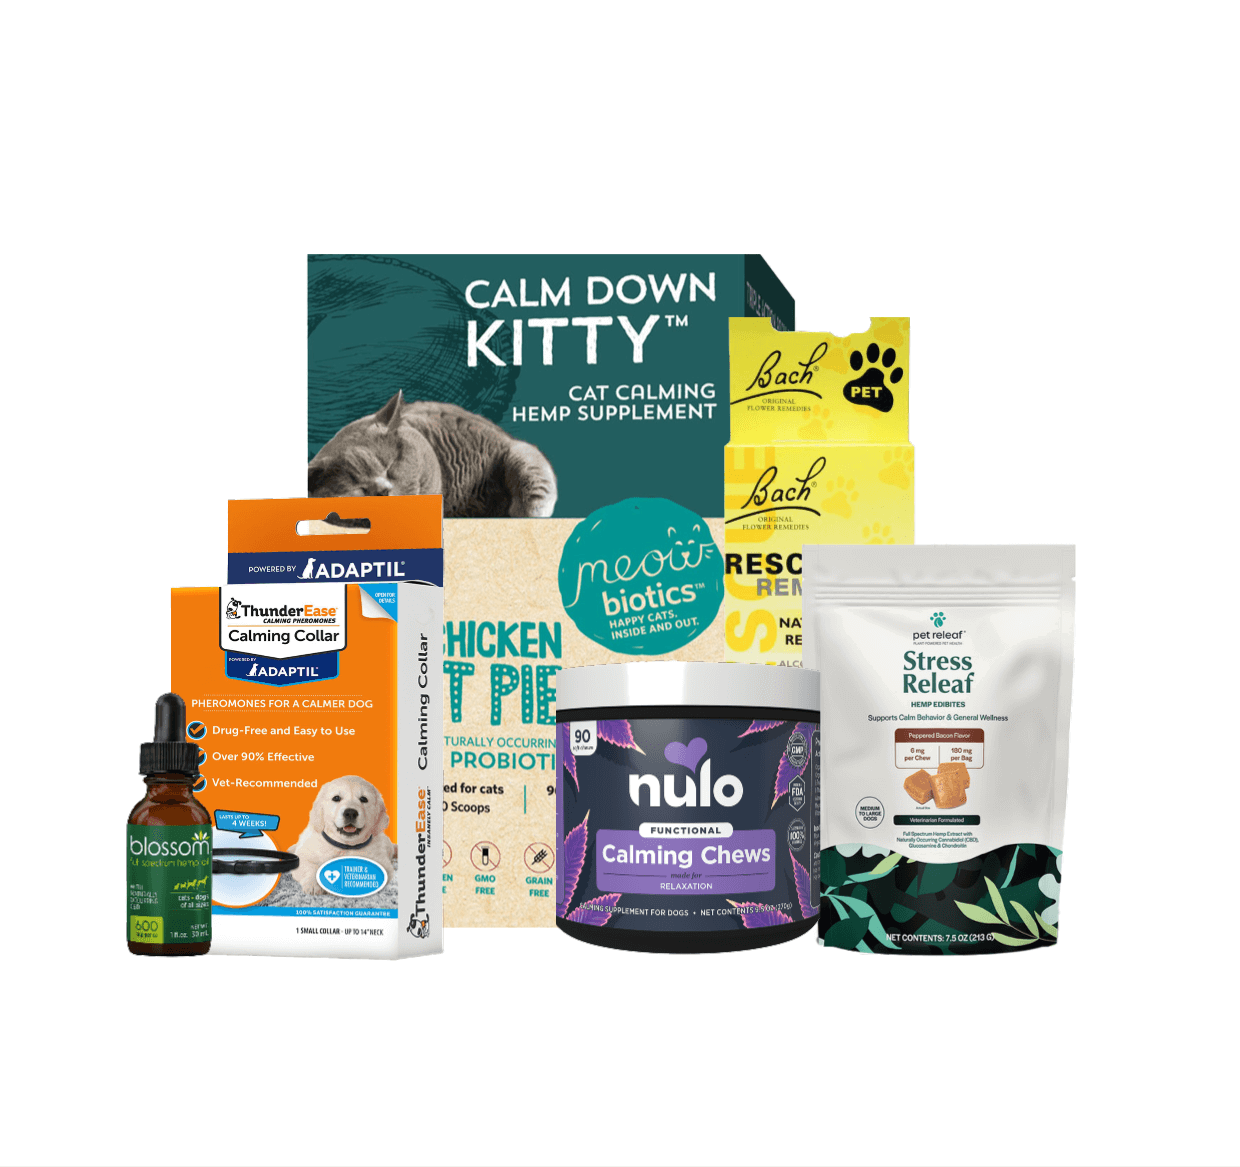 A variety of calming pet products